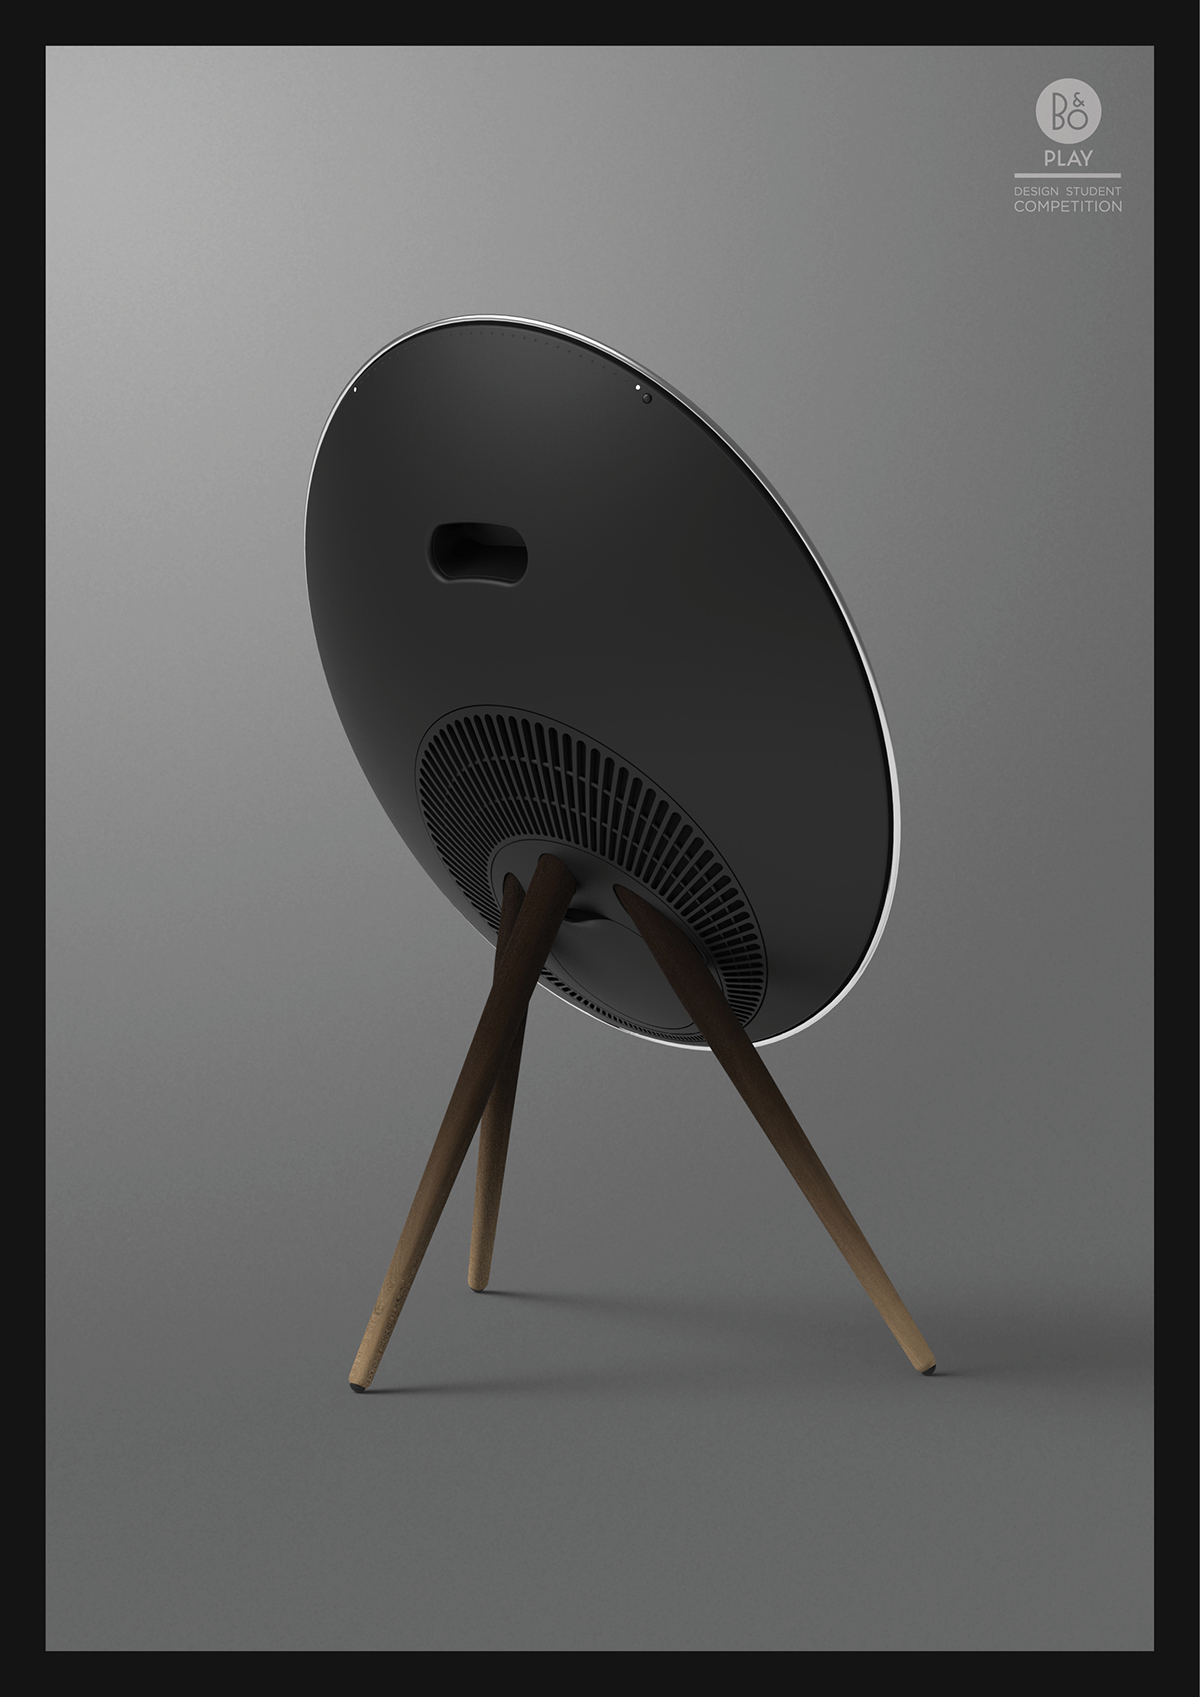 Bang & Olufsen a9 speaker design Competition B&O play BeoPlay